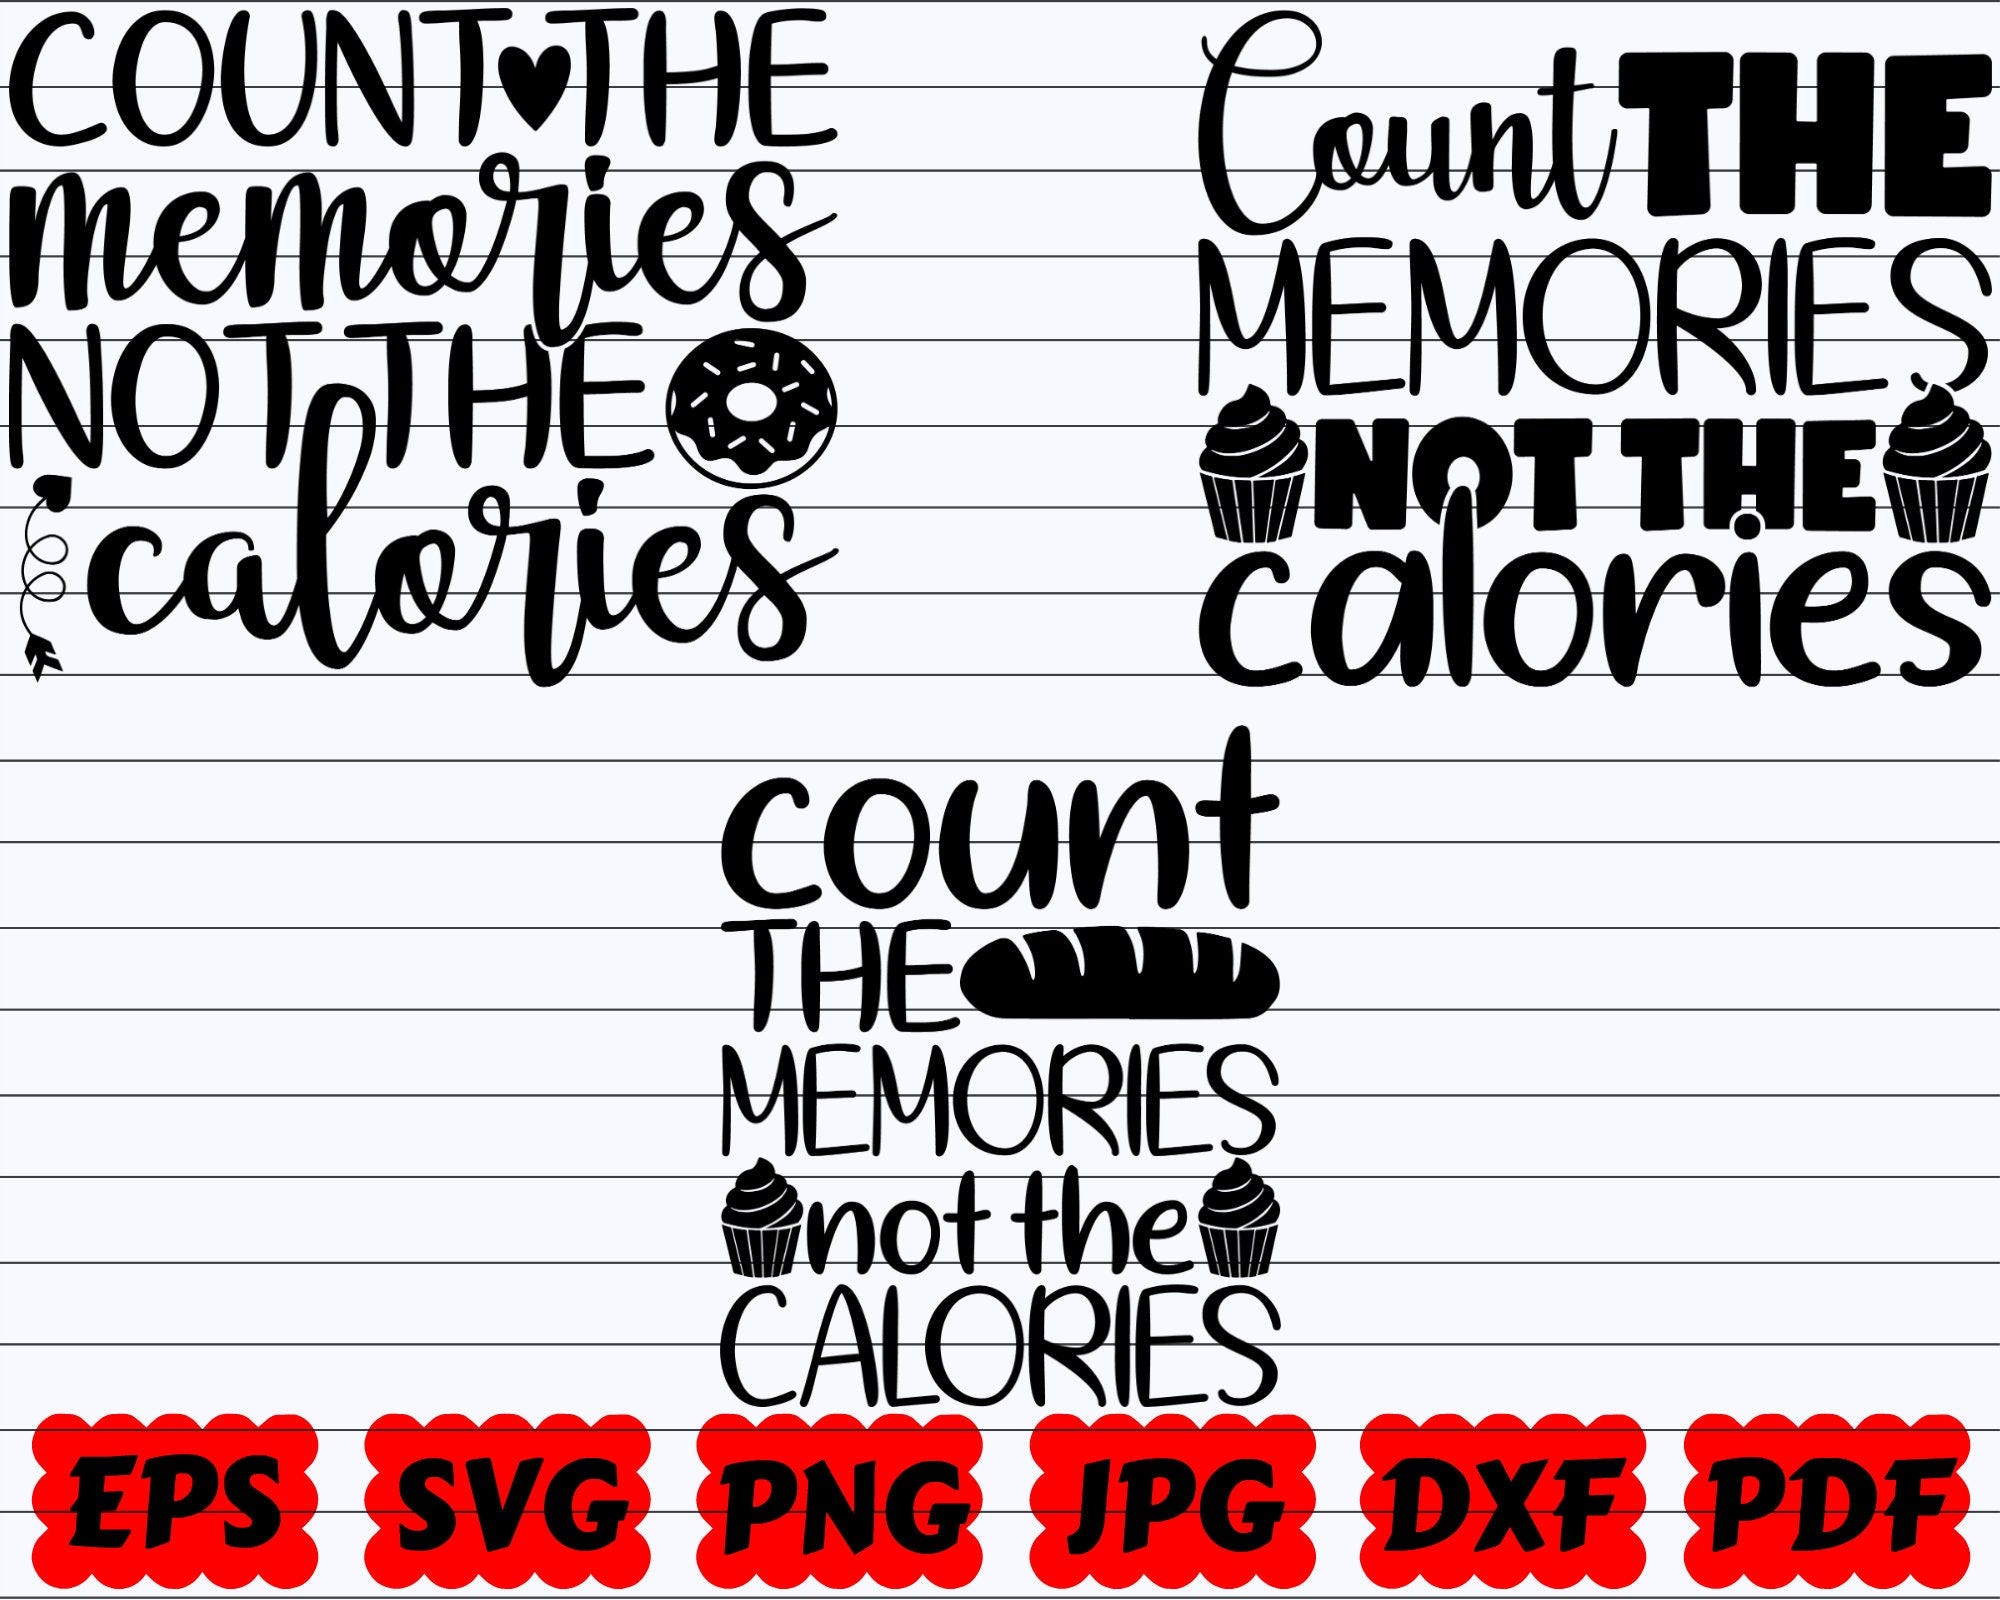 Count The Memories Not The Calories SVG | Count The Memories SVG | Funny Kitchen SVG | Calories Svg | Kitchen Cut File | Kitchen Quote Svg